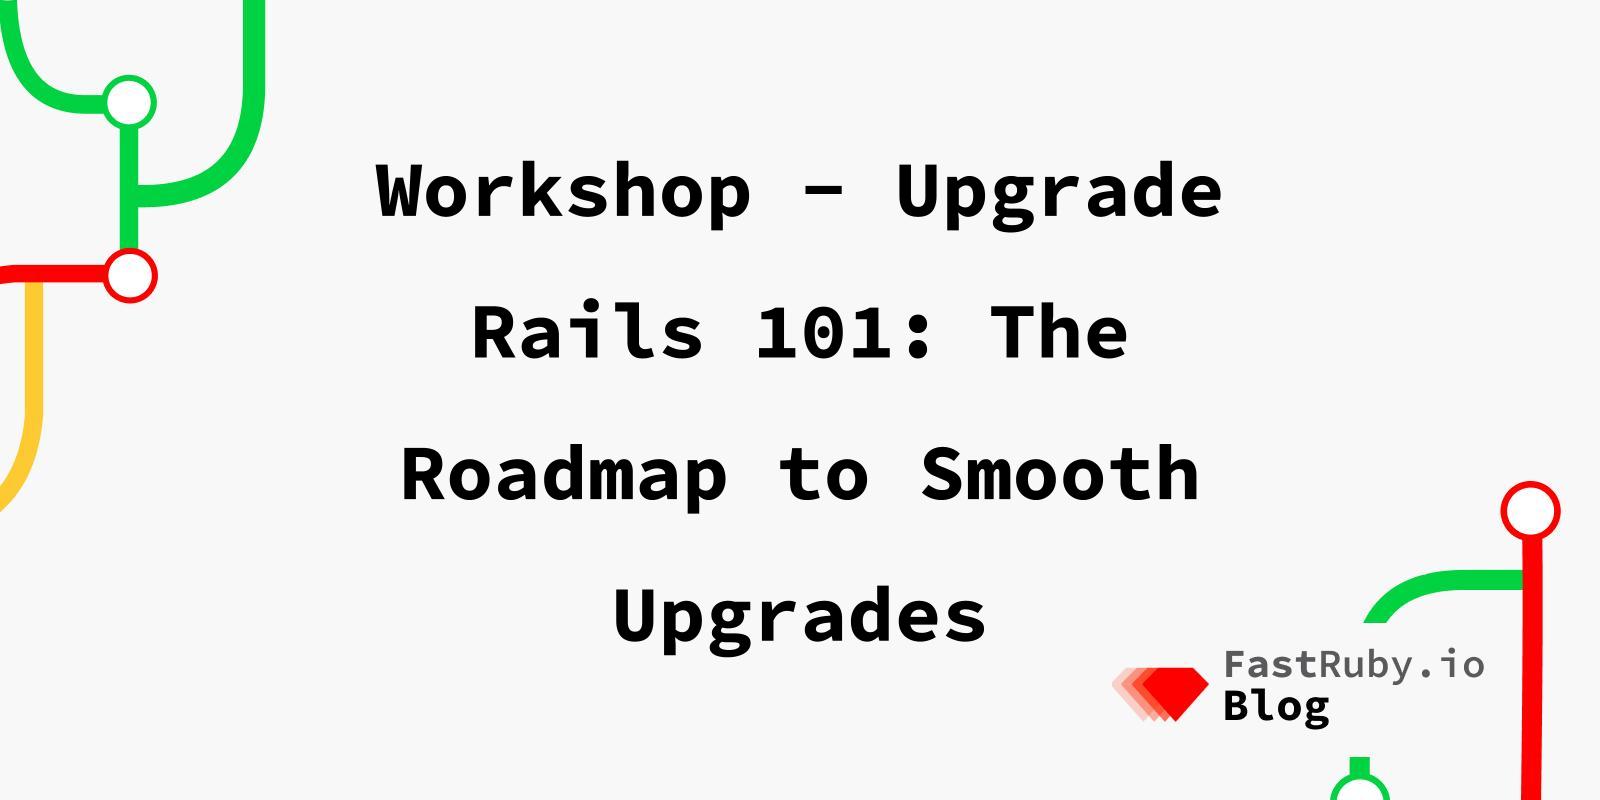 Workshop - Upgrade Rails 101: The Roadmap to Smooth Upgrades